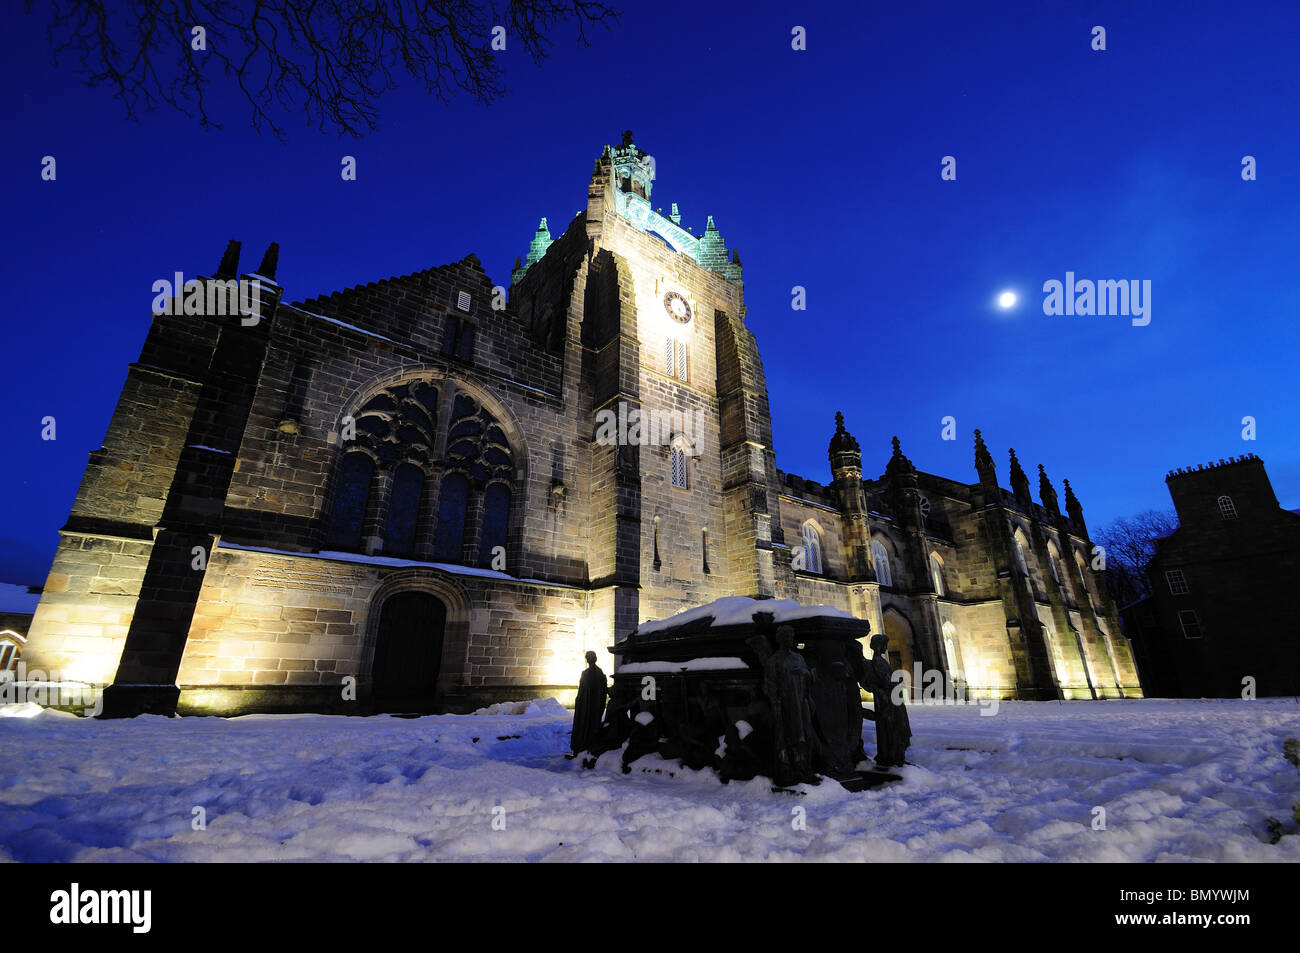 King's College Chapel at night, Old Aberdeen, Scotland Stock Photo